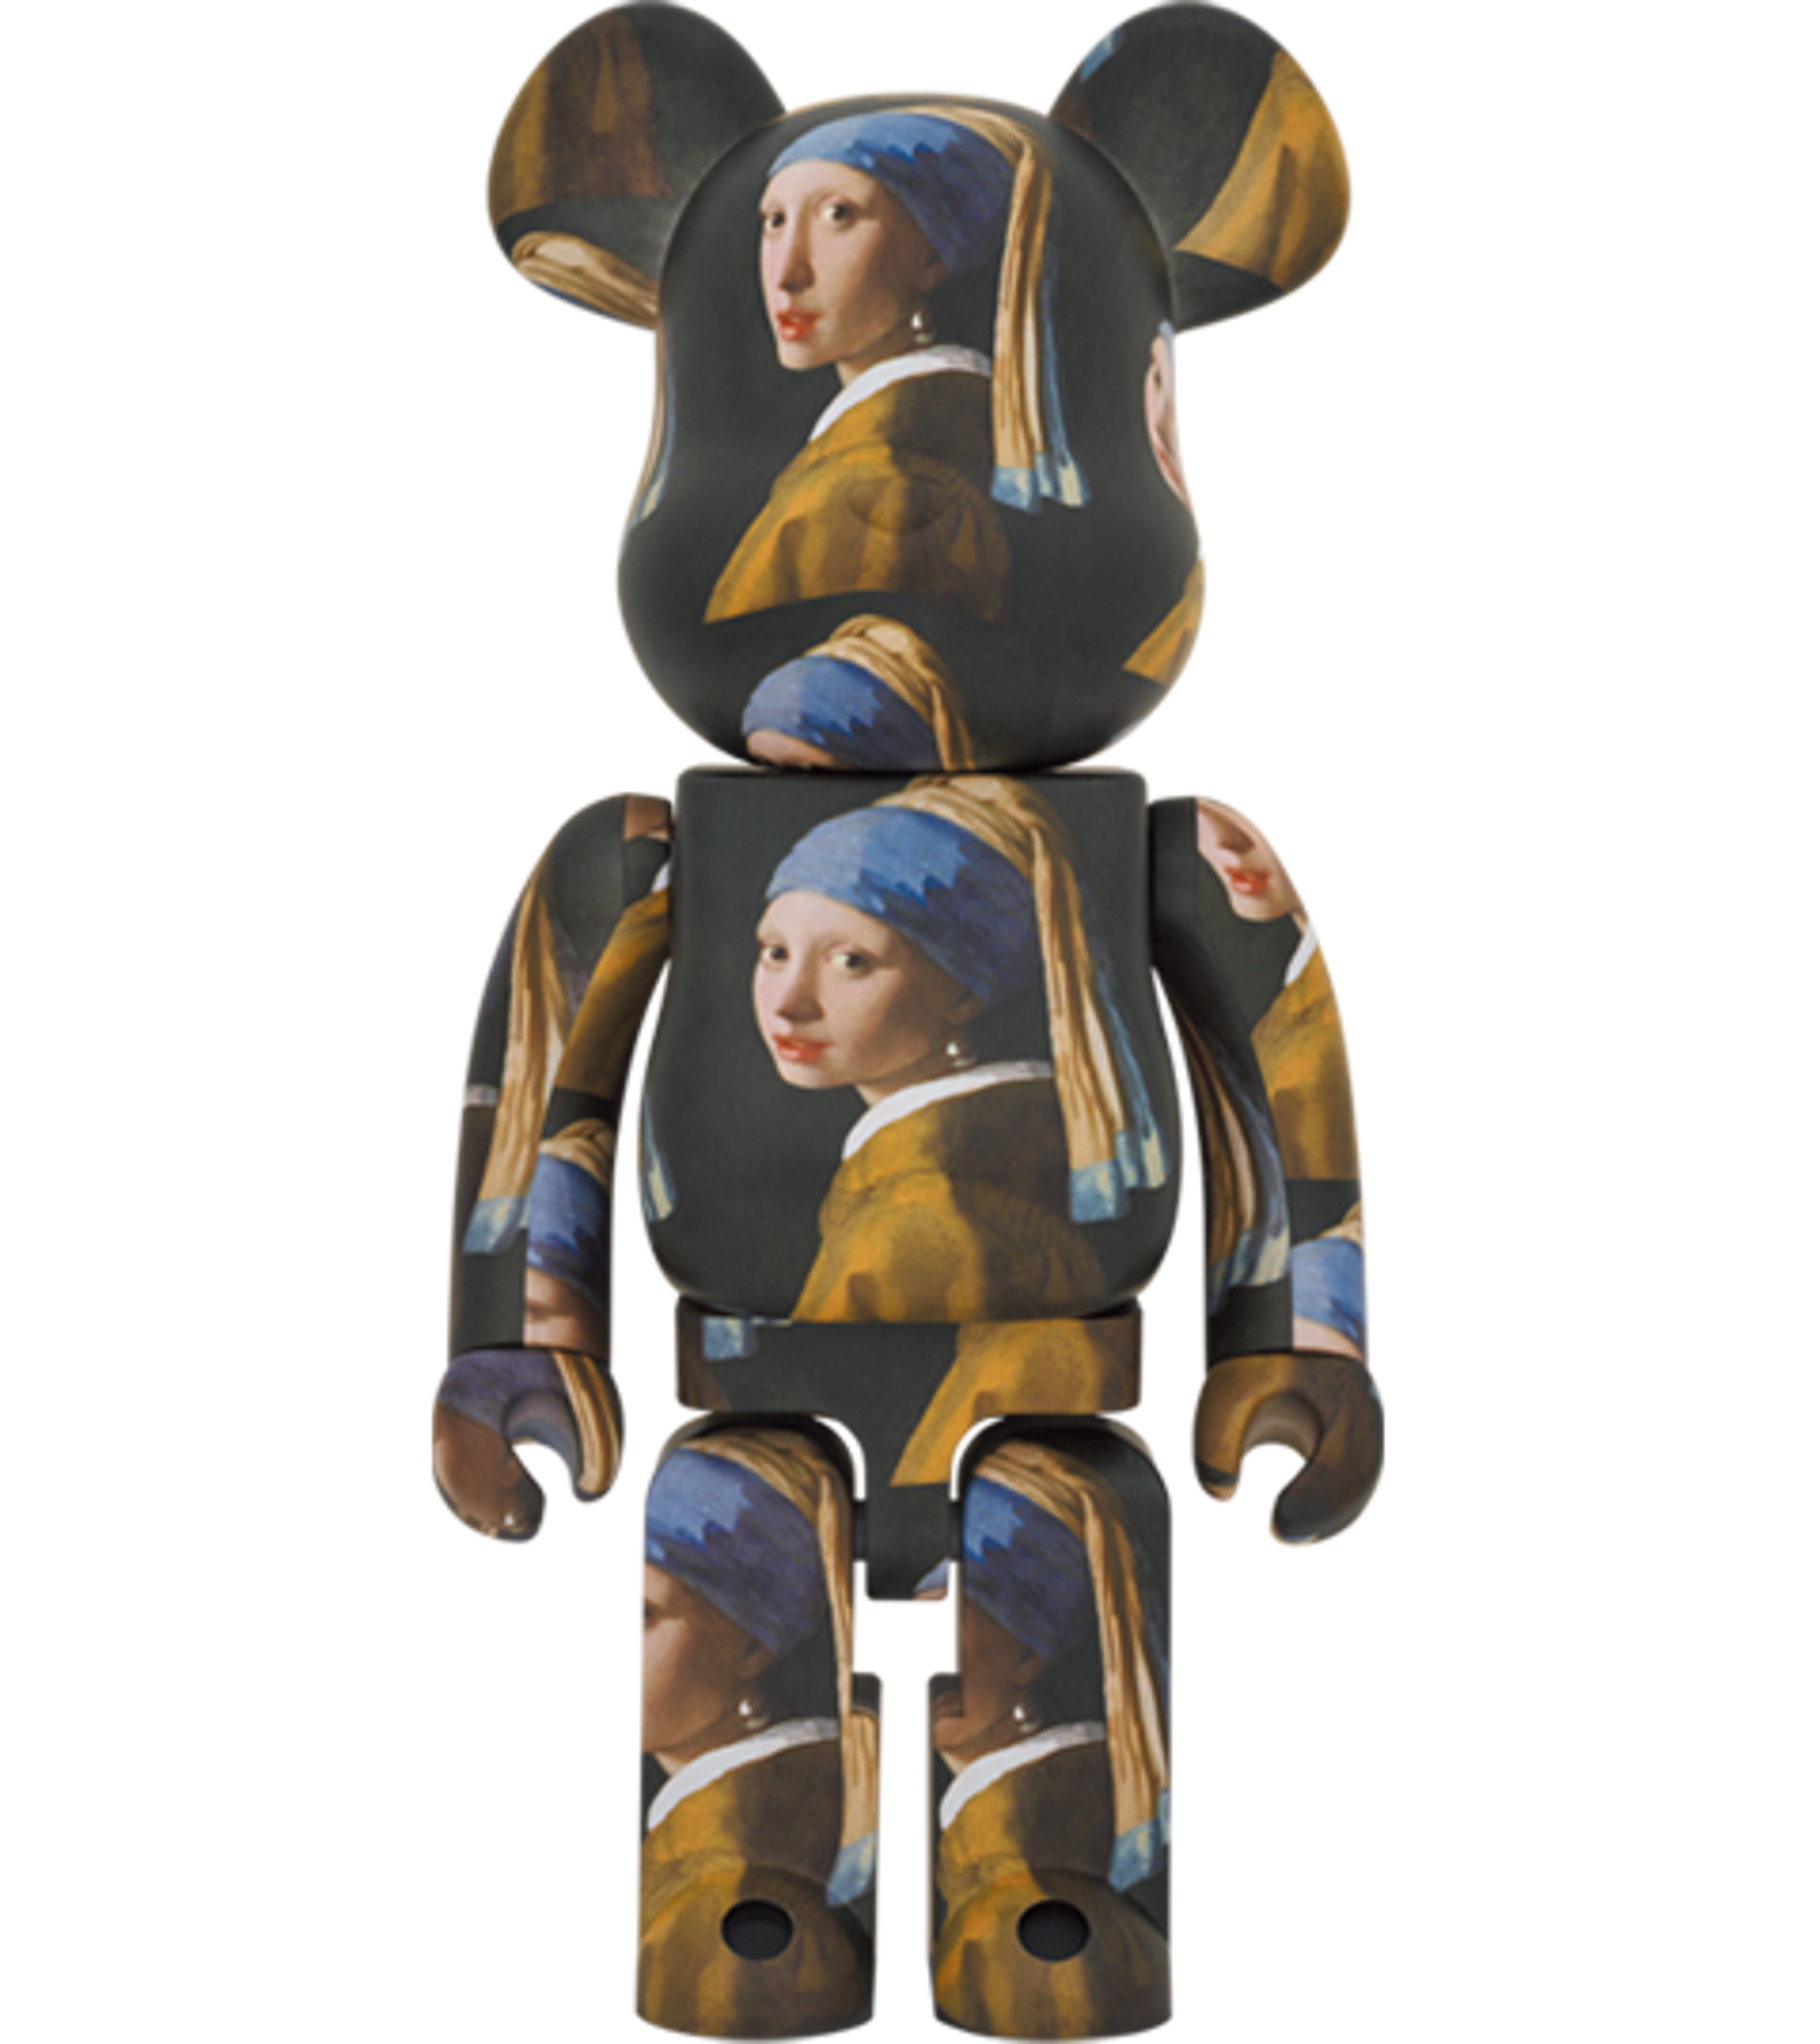 BE@RBRICK JOHANNES VERMEER (GIRL WITH A PEARL EARRING) 1000%